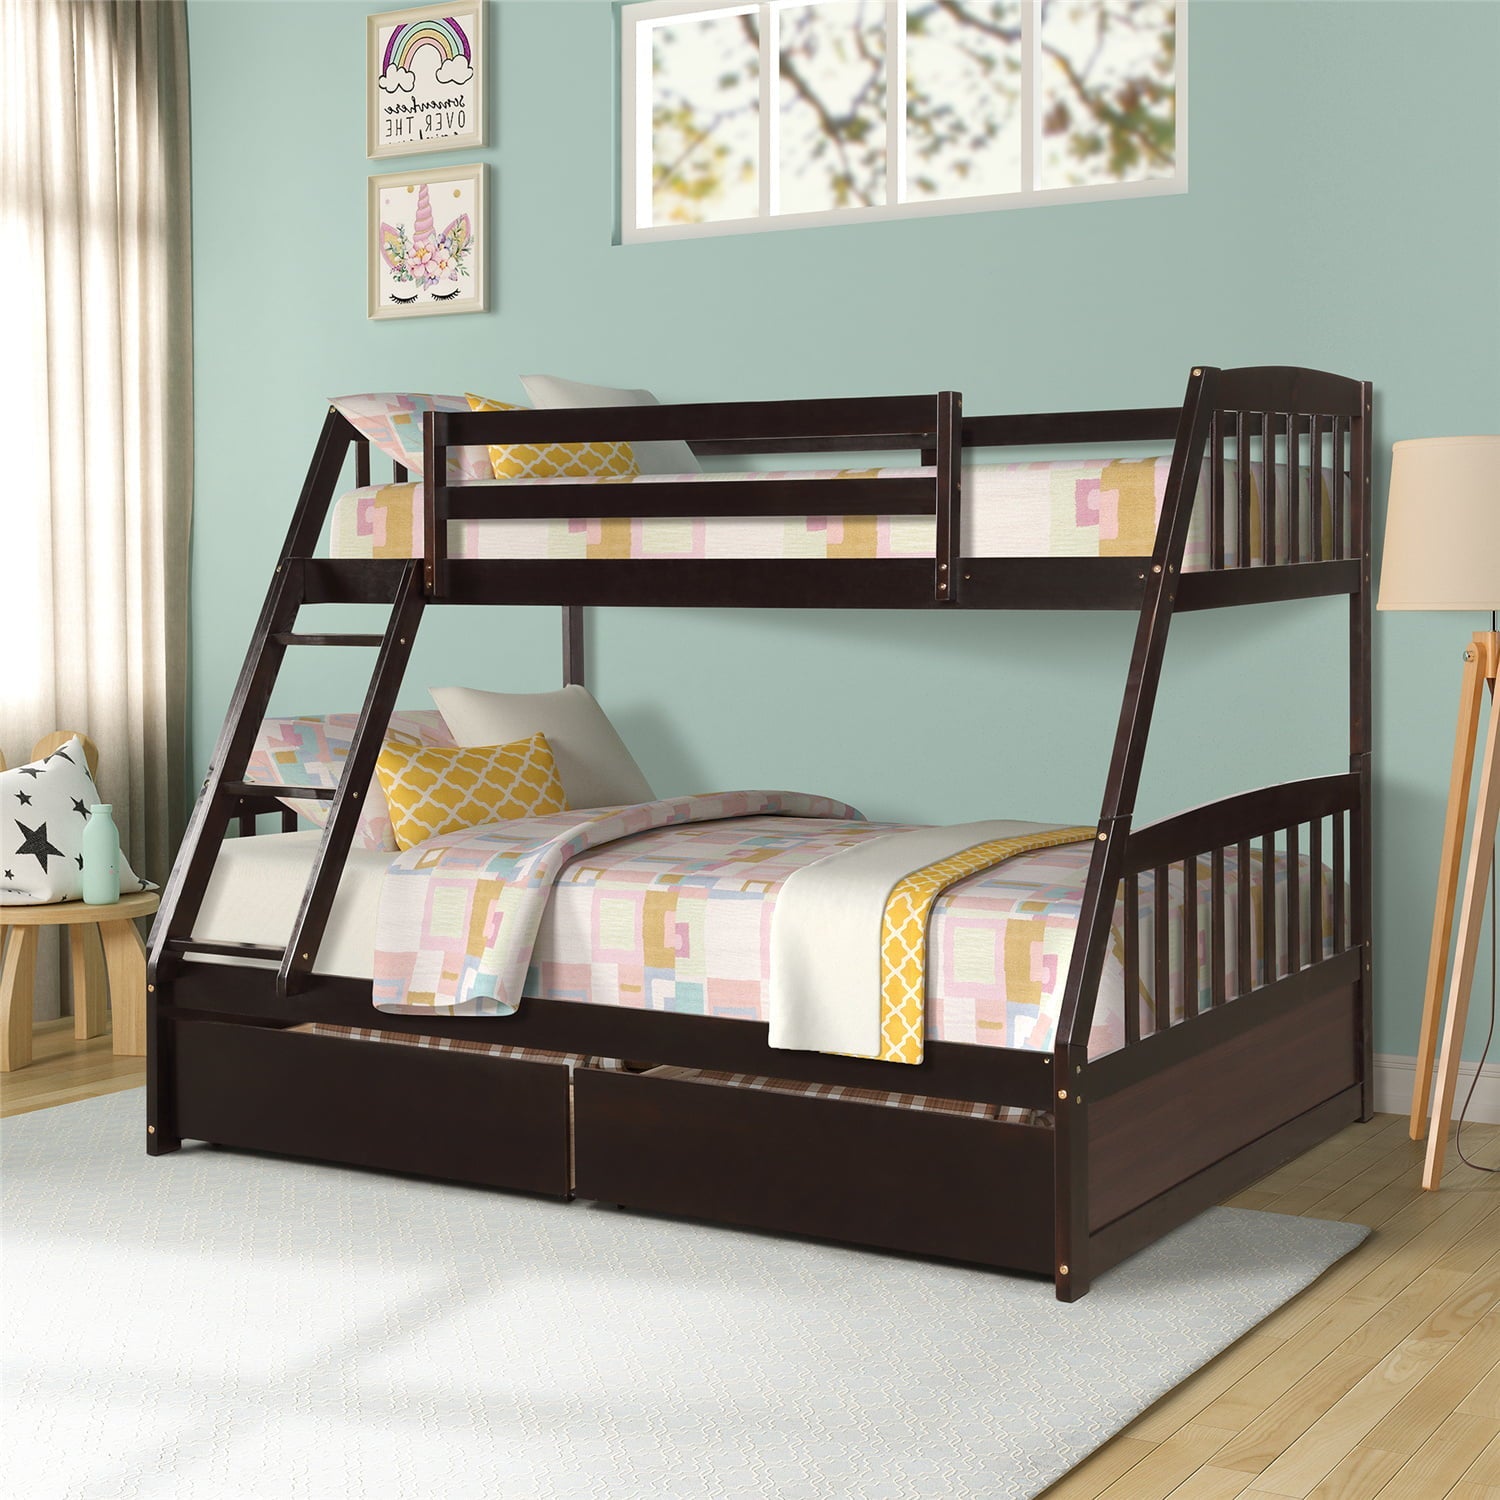 Twin Over Full Bunk Bed with Two Storage Drawers, Pine Wood Bed Frame and Ladder with Guard Rails for Toddlers, Kids, Teens, Boys and Girls, Espresso